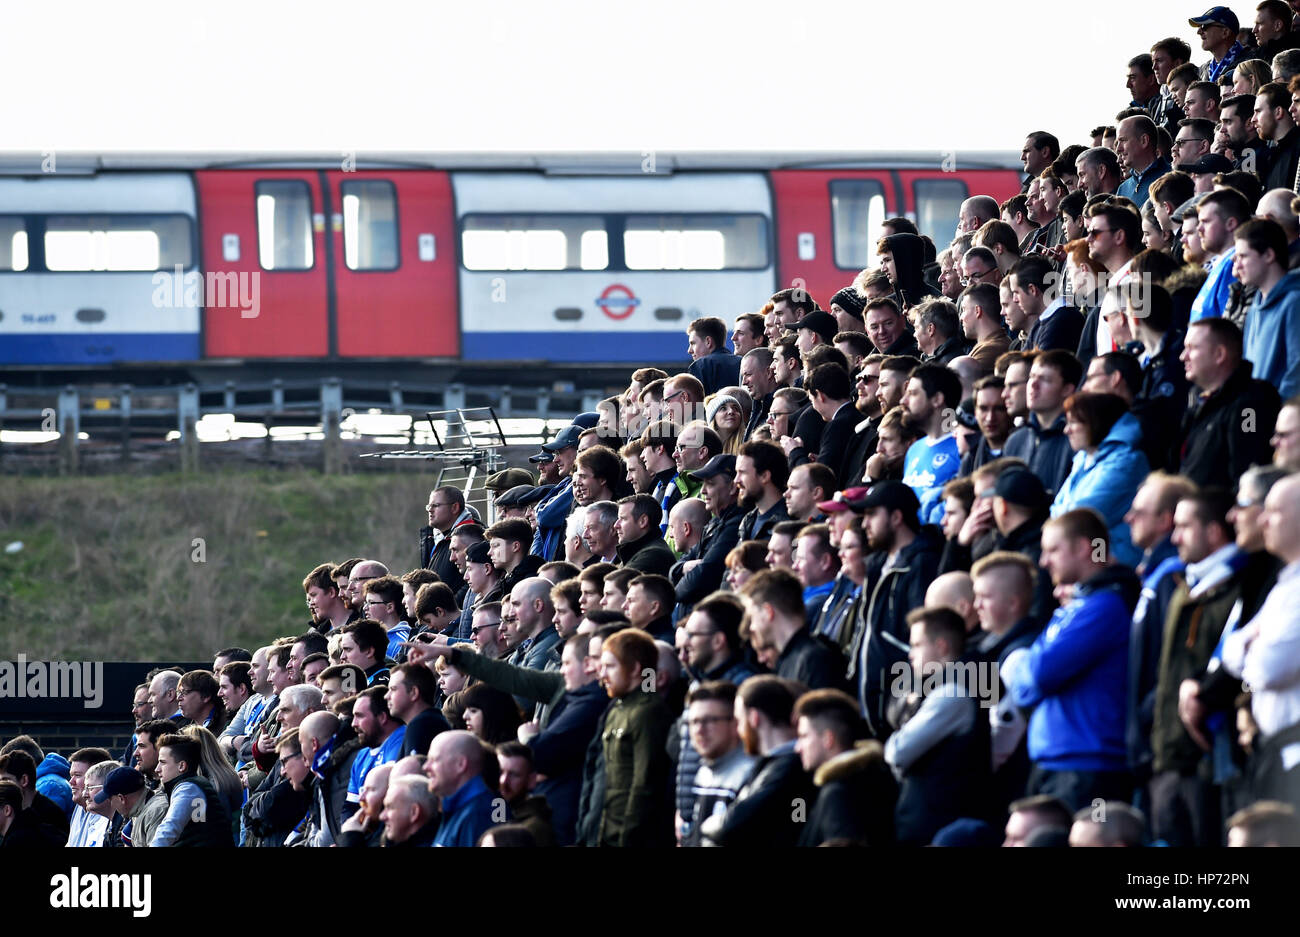 A London underground train passes by the fans during the Sky Bet League 2 match between Barnet and Portsmouth at The Hive Stadium in London. February 18, 2017. Editorial use only. No merchandising. For Football images FA and Premier League restrictions apply inc. no internet/mobile usage without FAPL license - for details contact Football Dataco Stock Photo